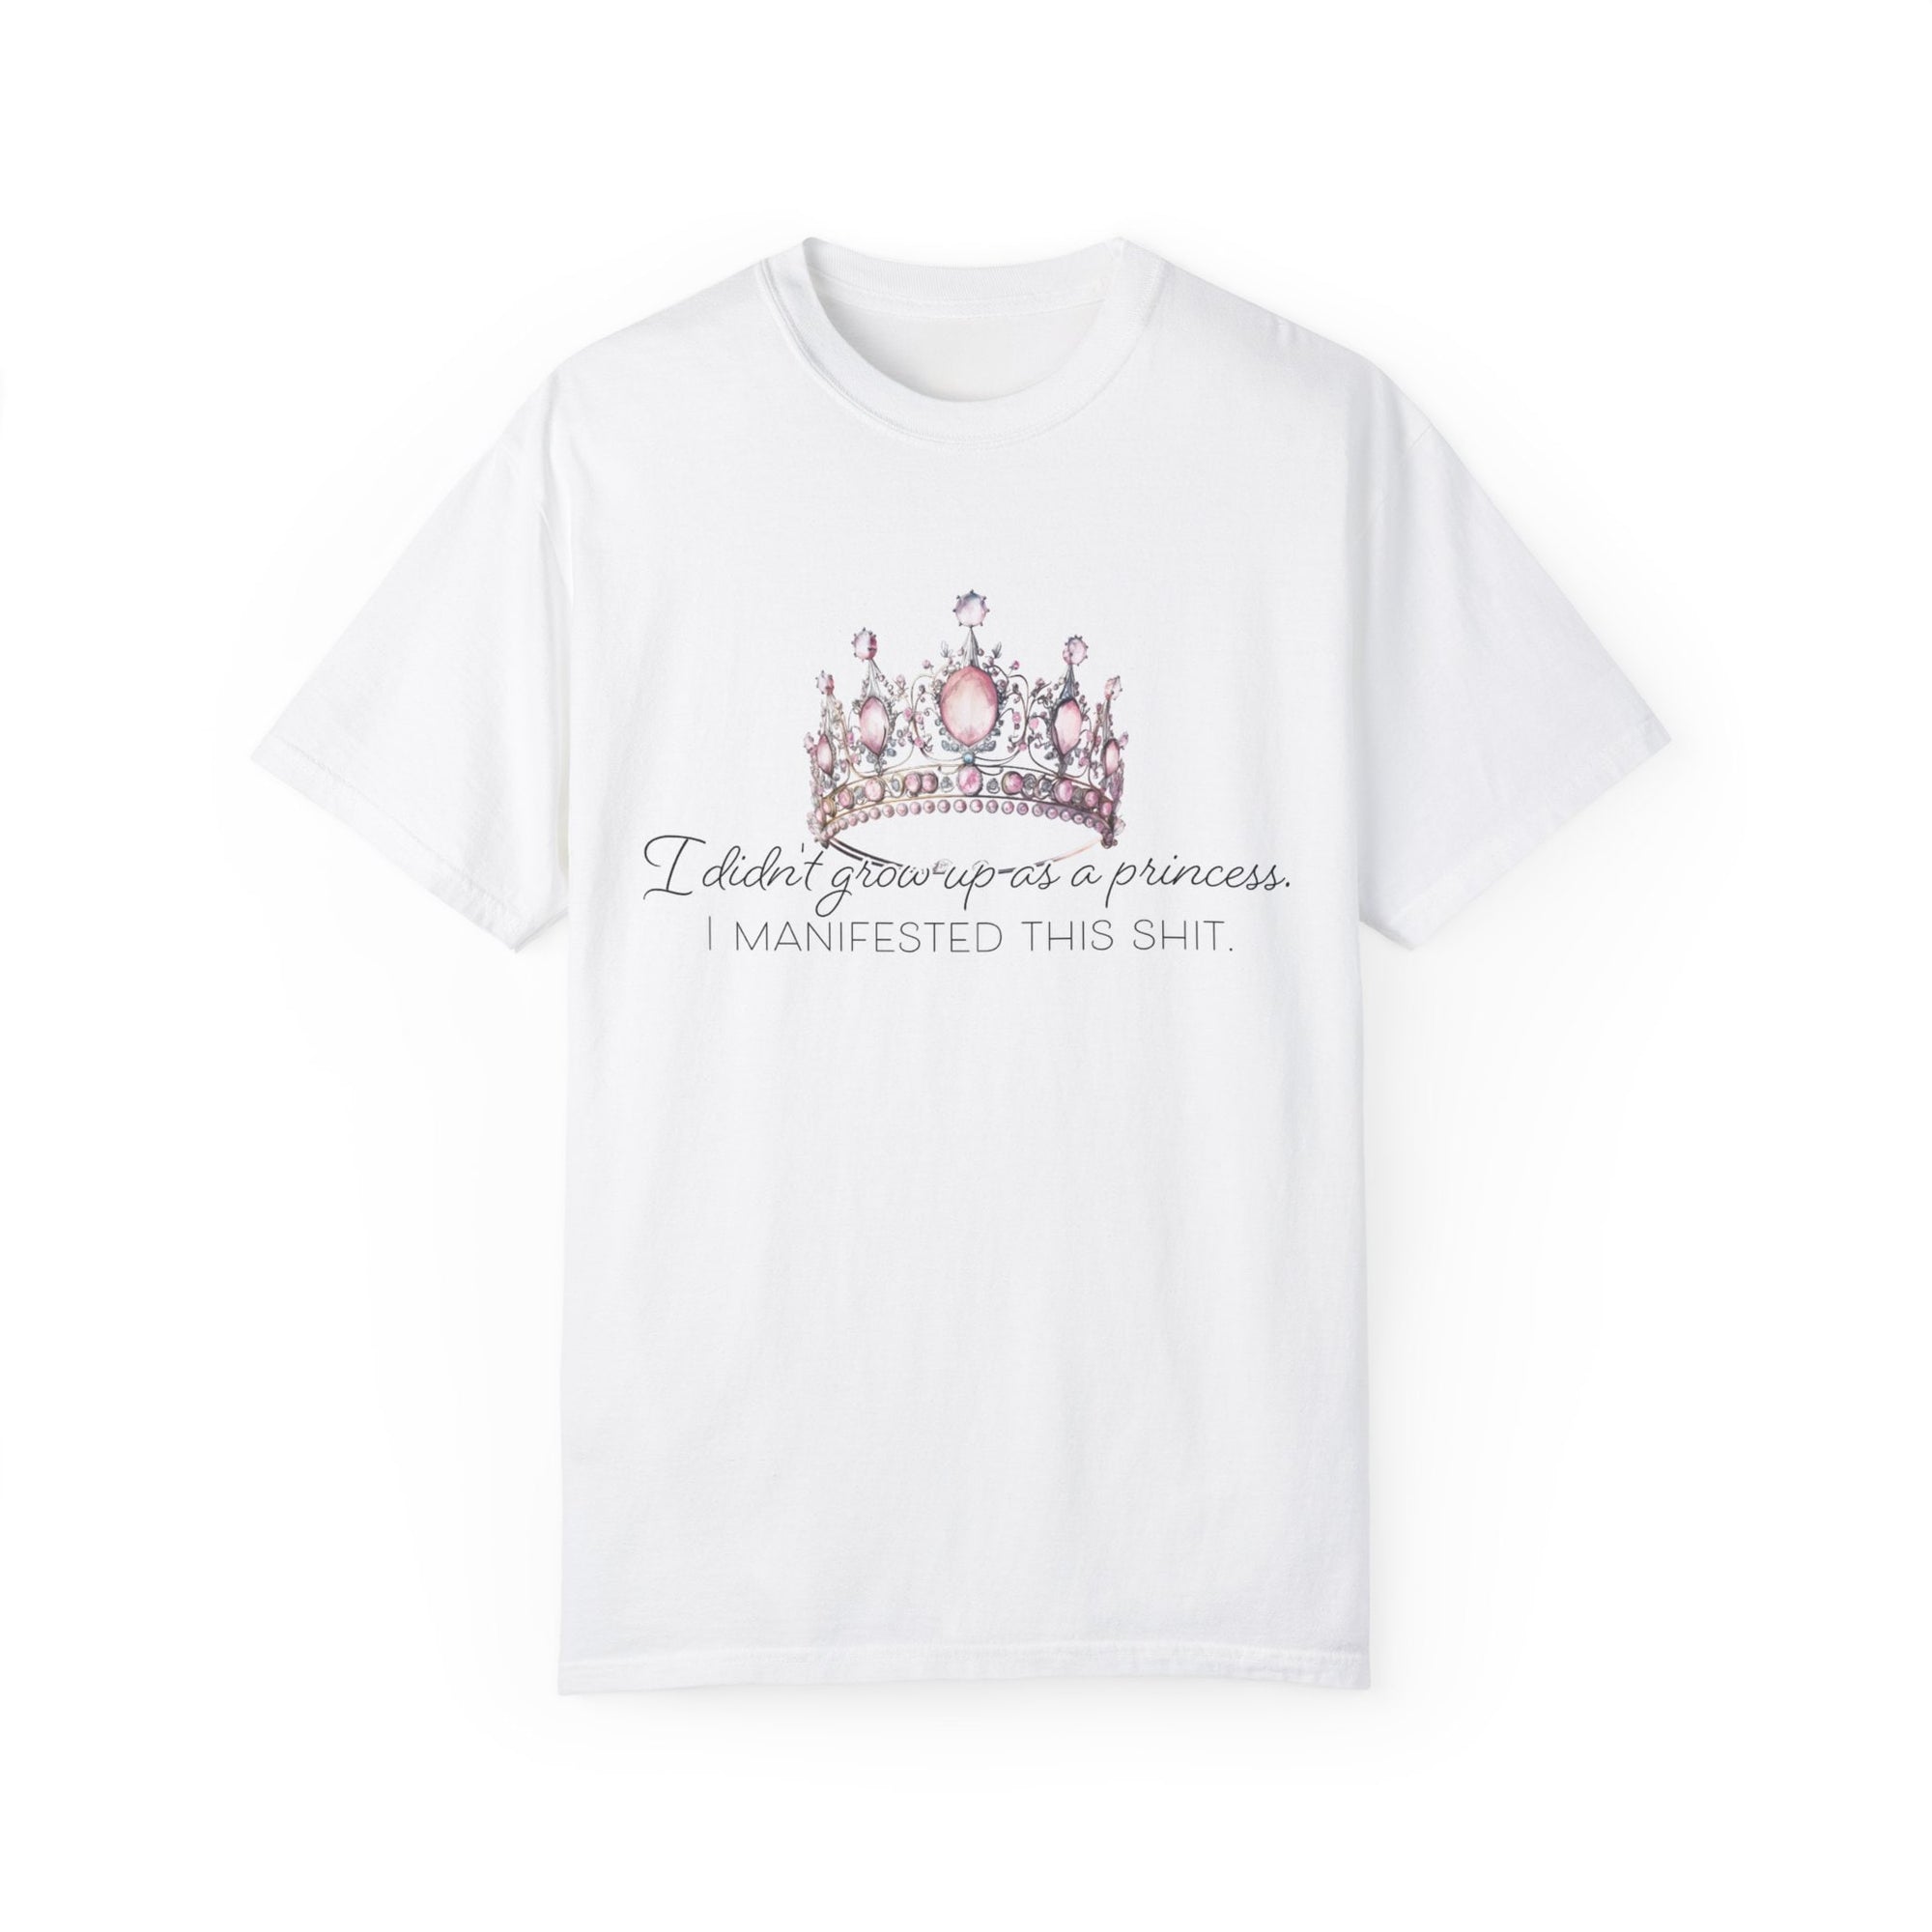 I Didn't Grow Up As A Princess. I Manifested This Shit. Unisex Garment-Dyed T-shirt